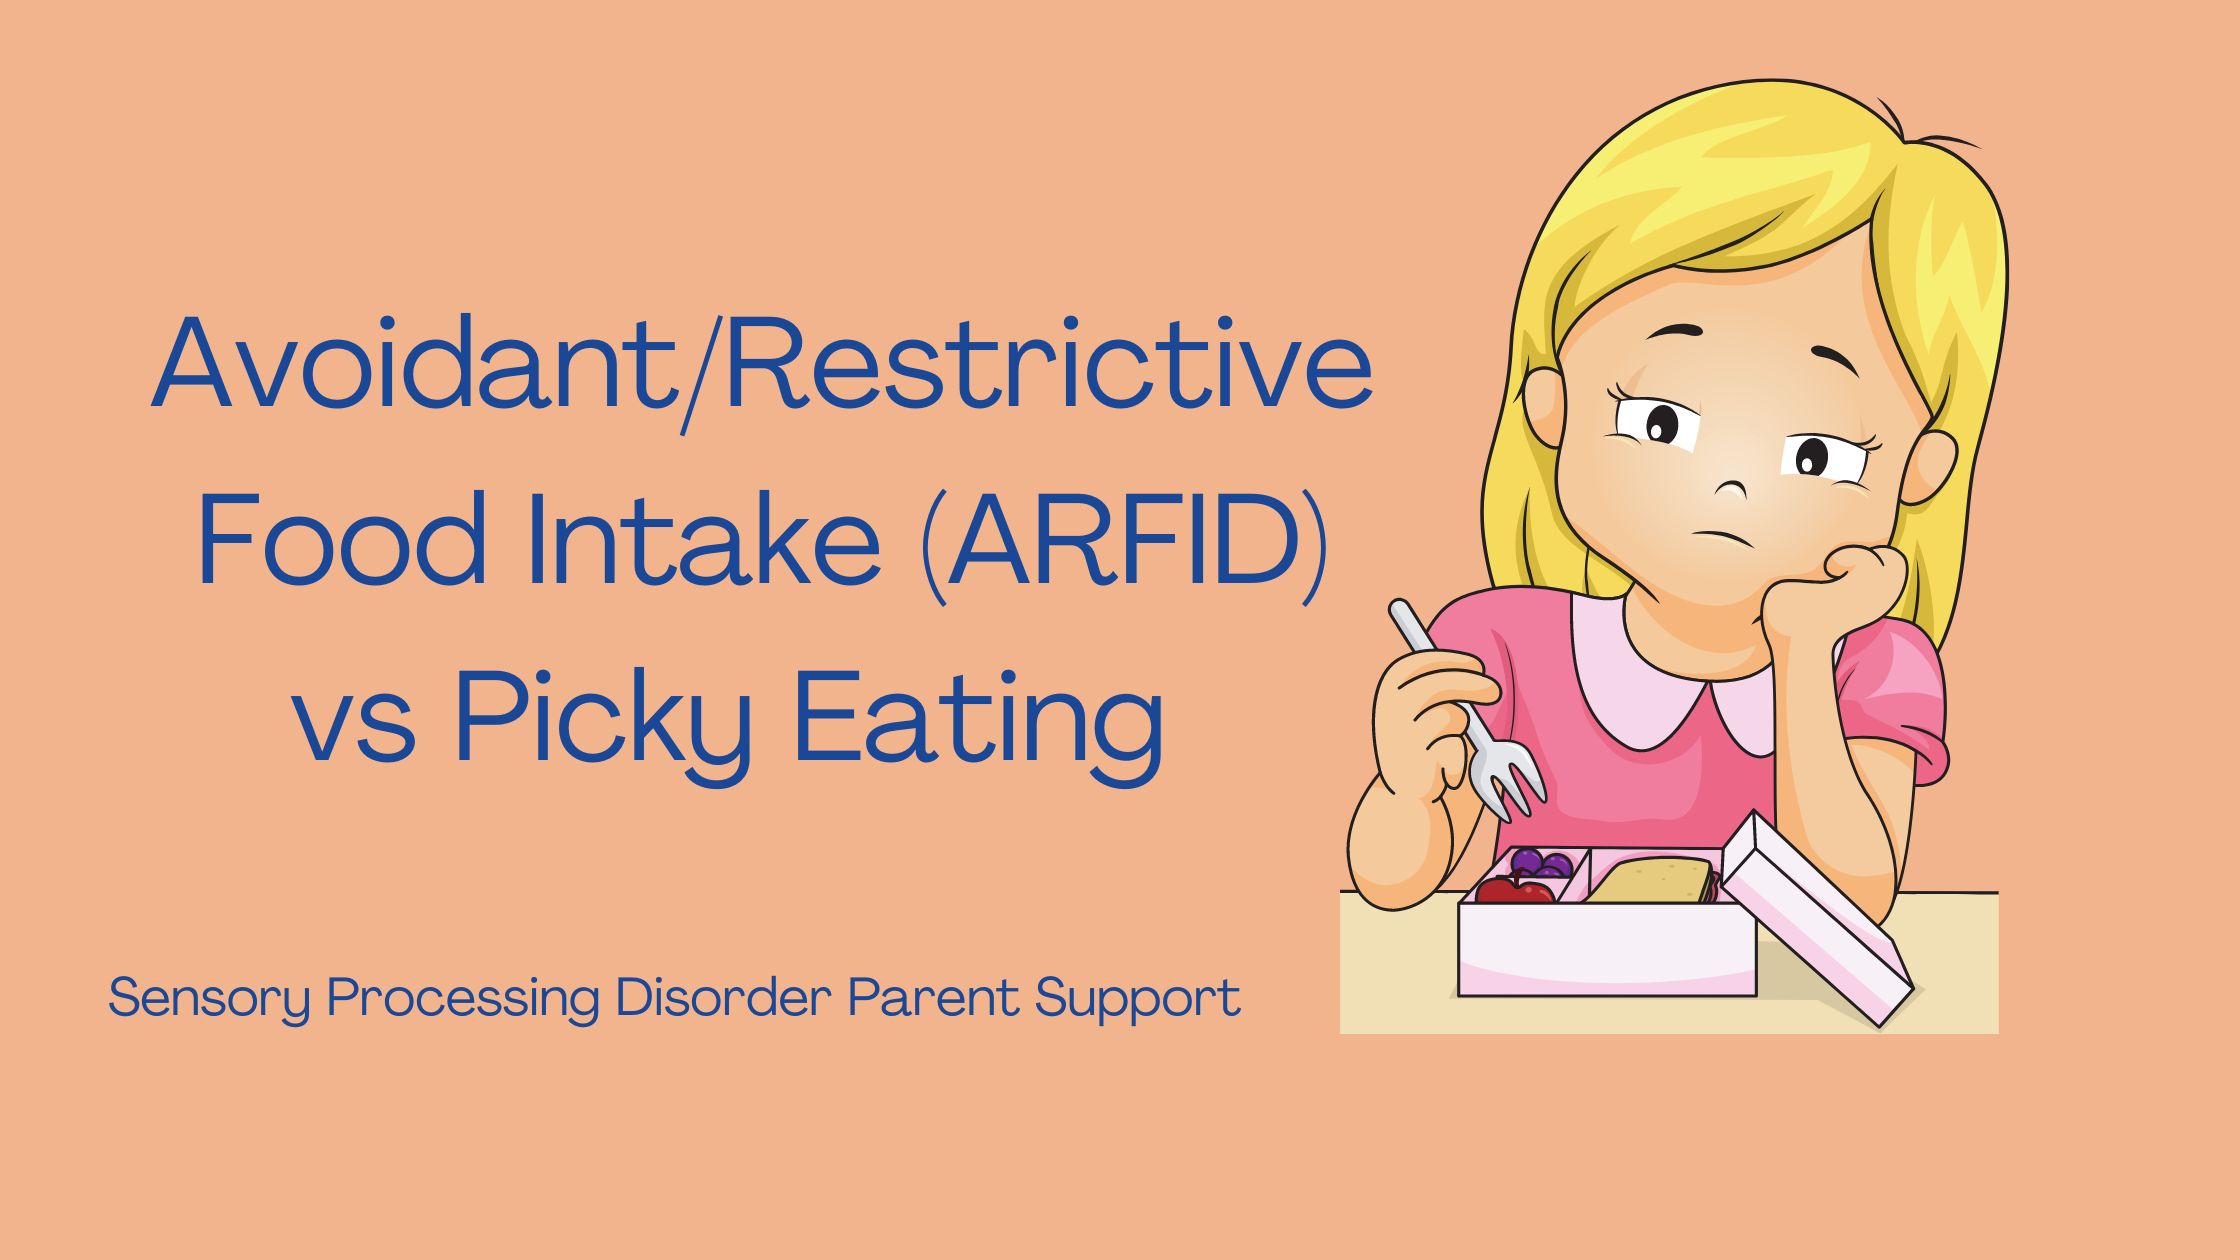 girl with ARFID picky eating refusing to eat his food Avoidant/Restrictive Food Intake (ARFID) vs Picky Eating